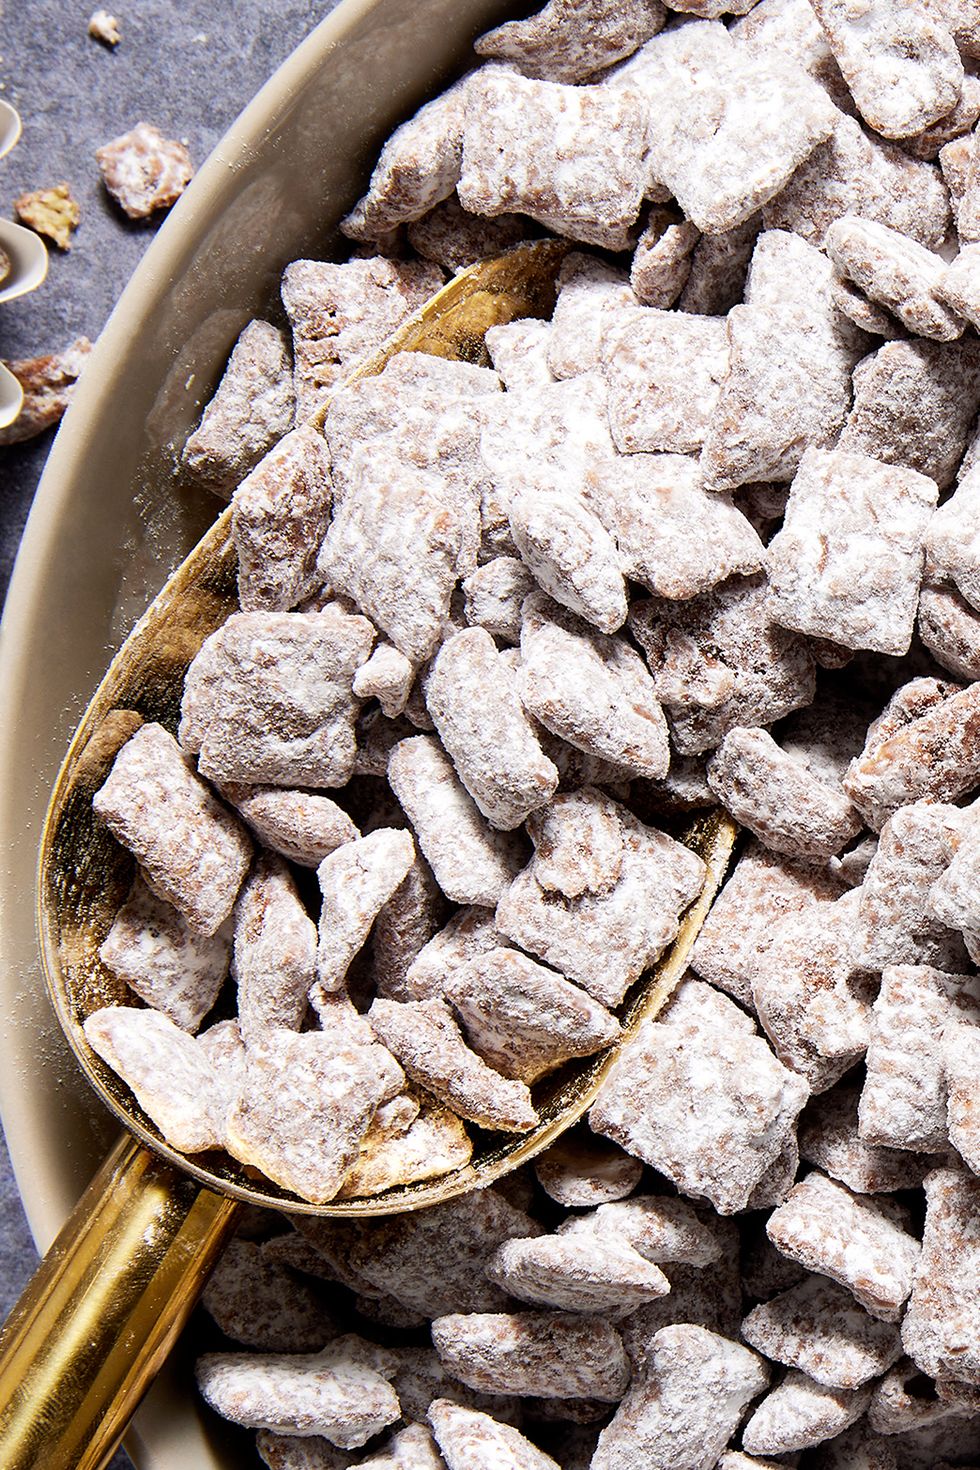 chex mix tossed in peanut butter and powdered sugar